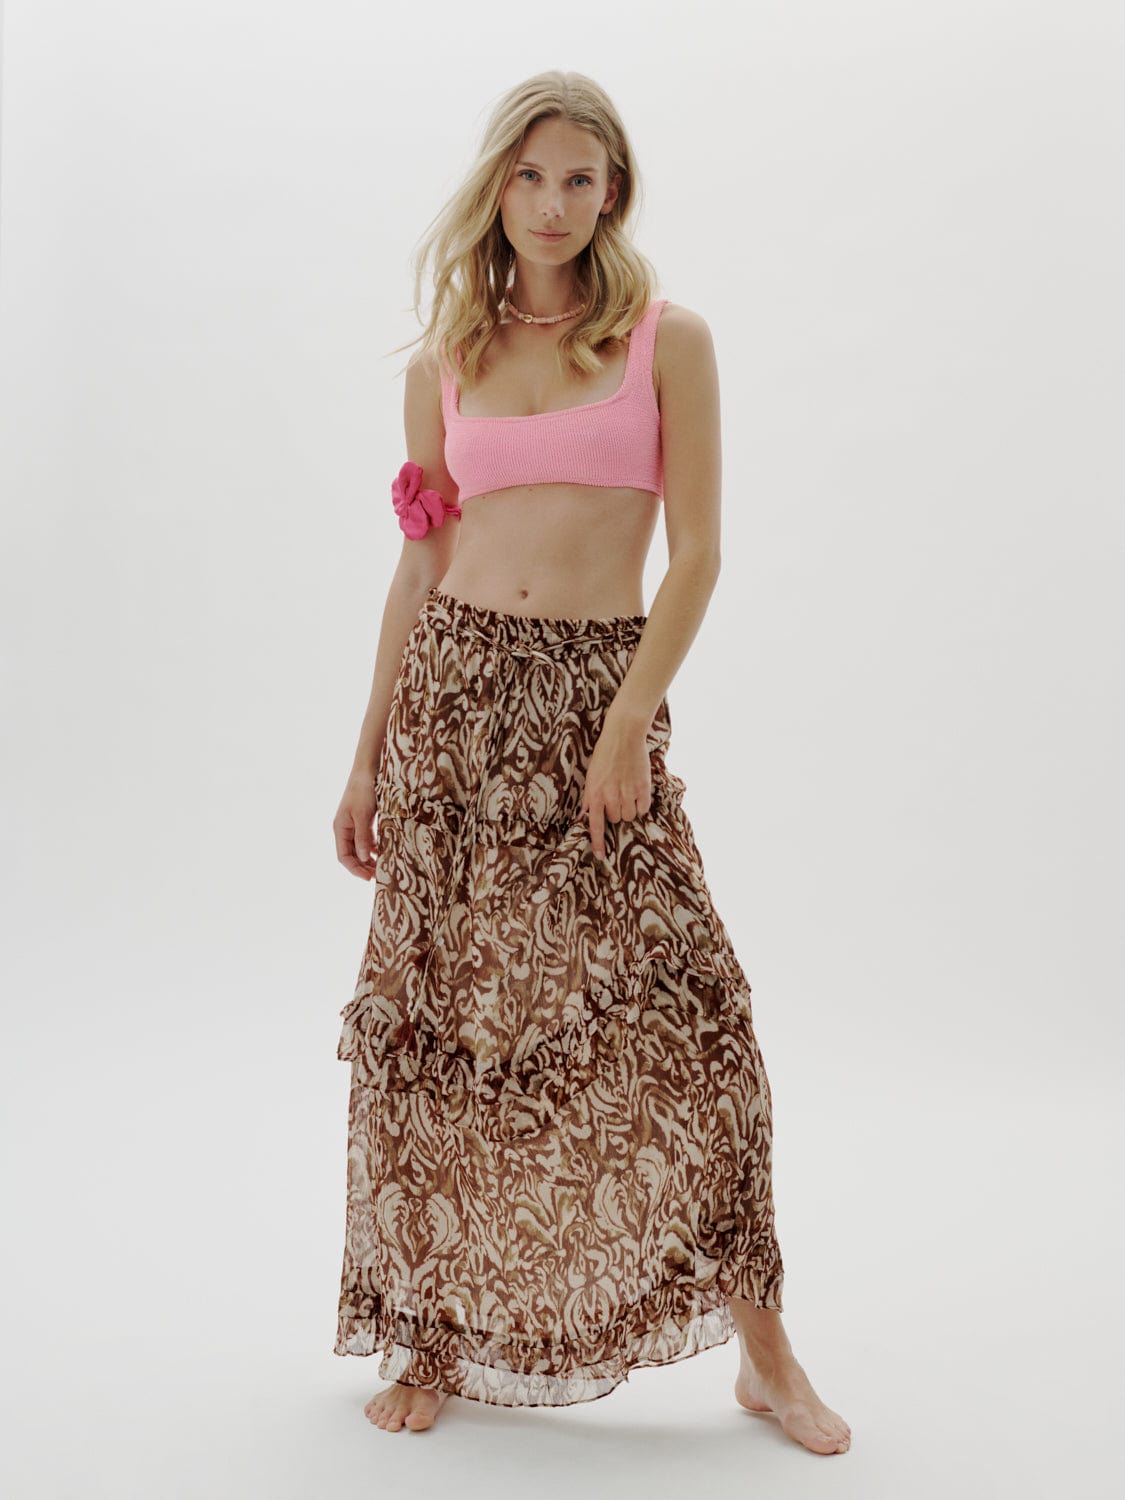 Moliin Esther Skirt in Mocca